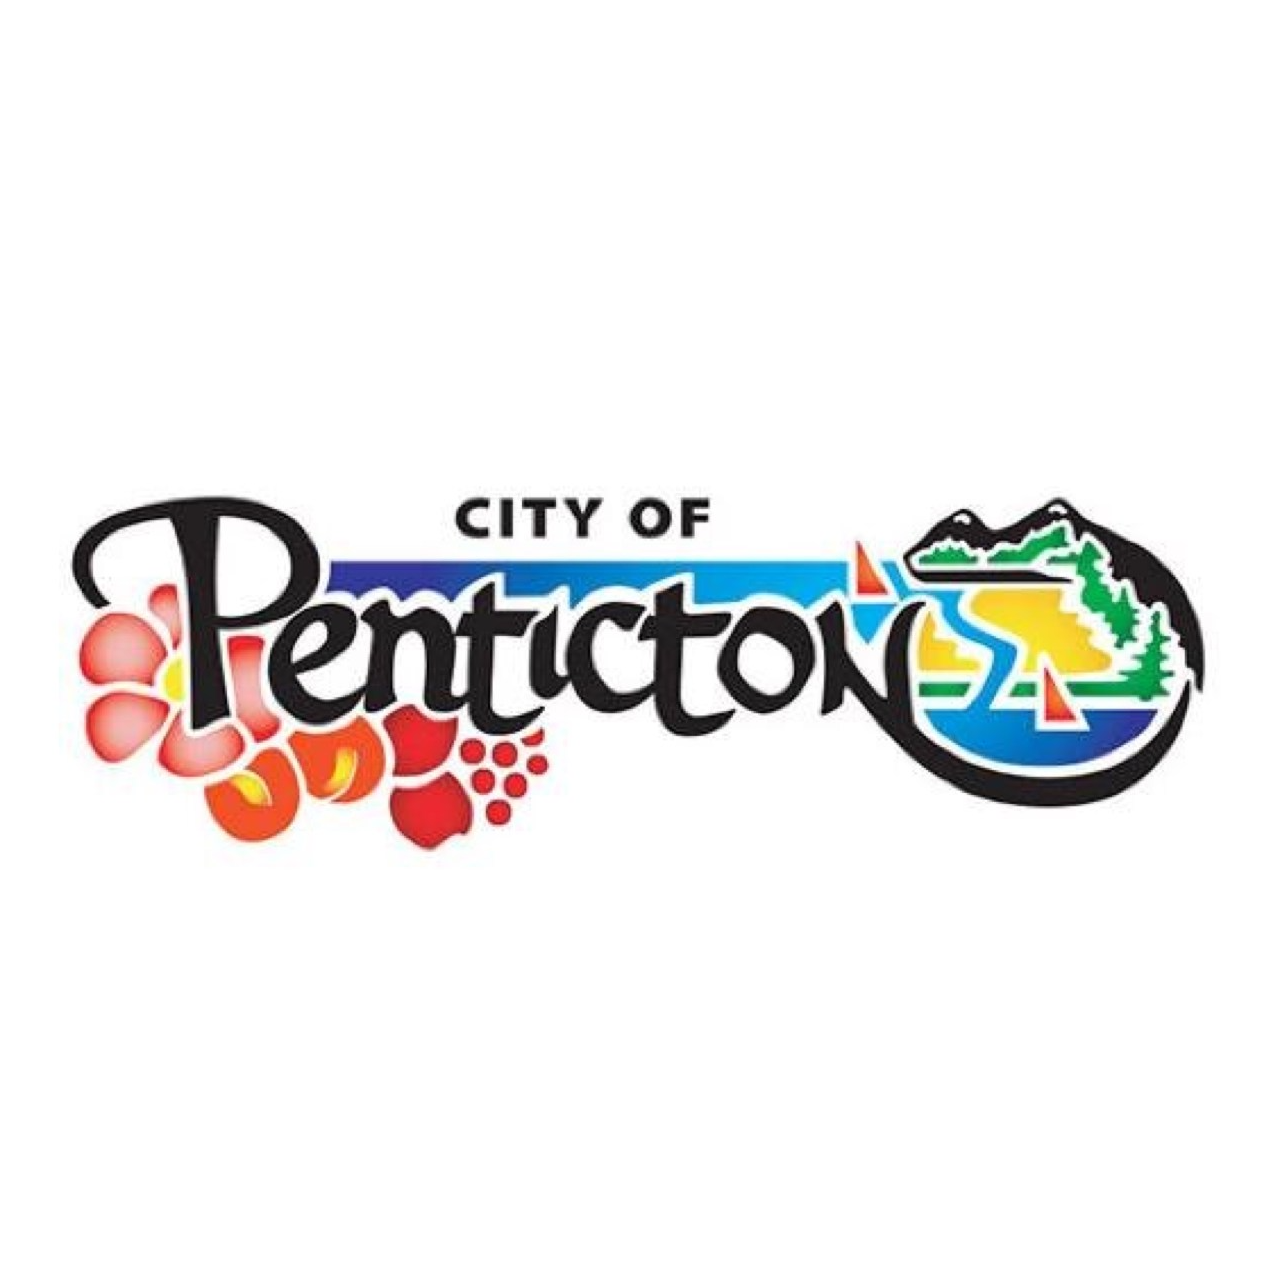 Penticton, BC conducted a onemonth pilot to allow alcohol consumption